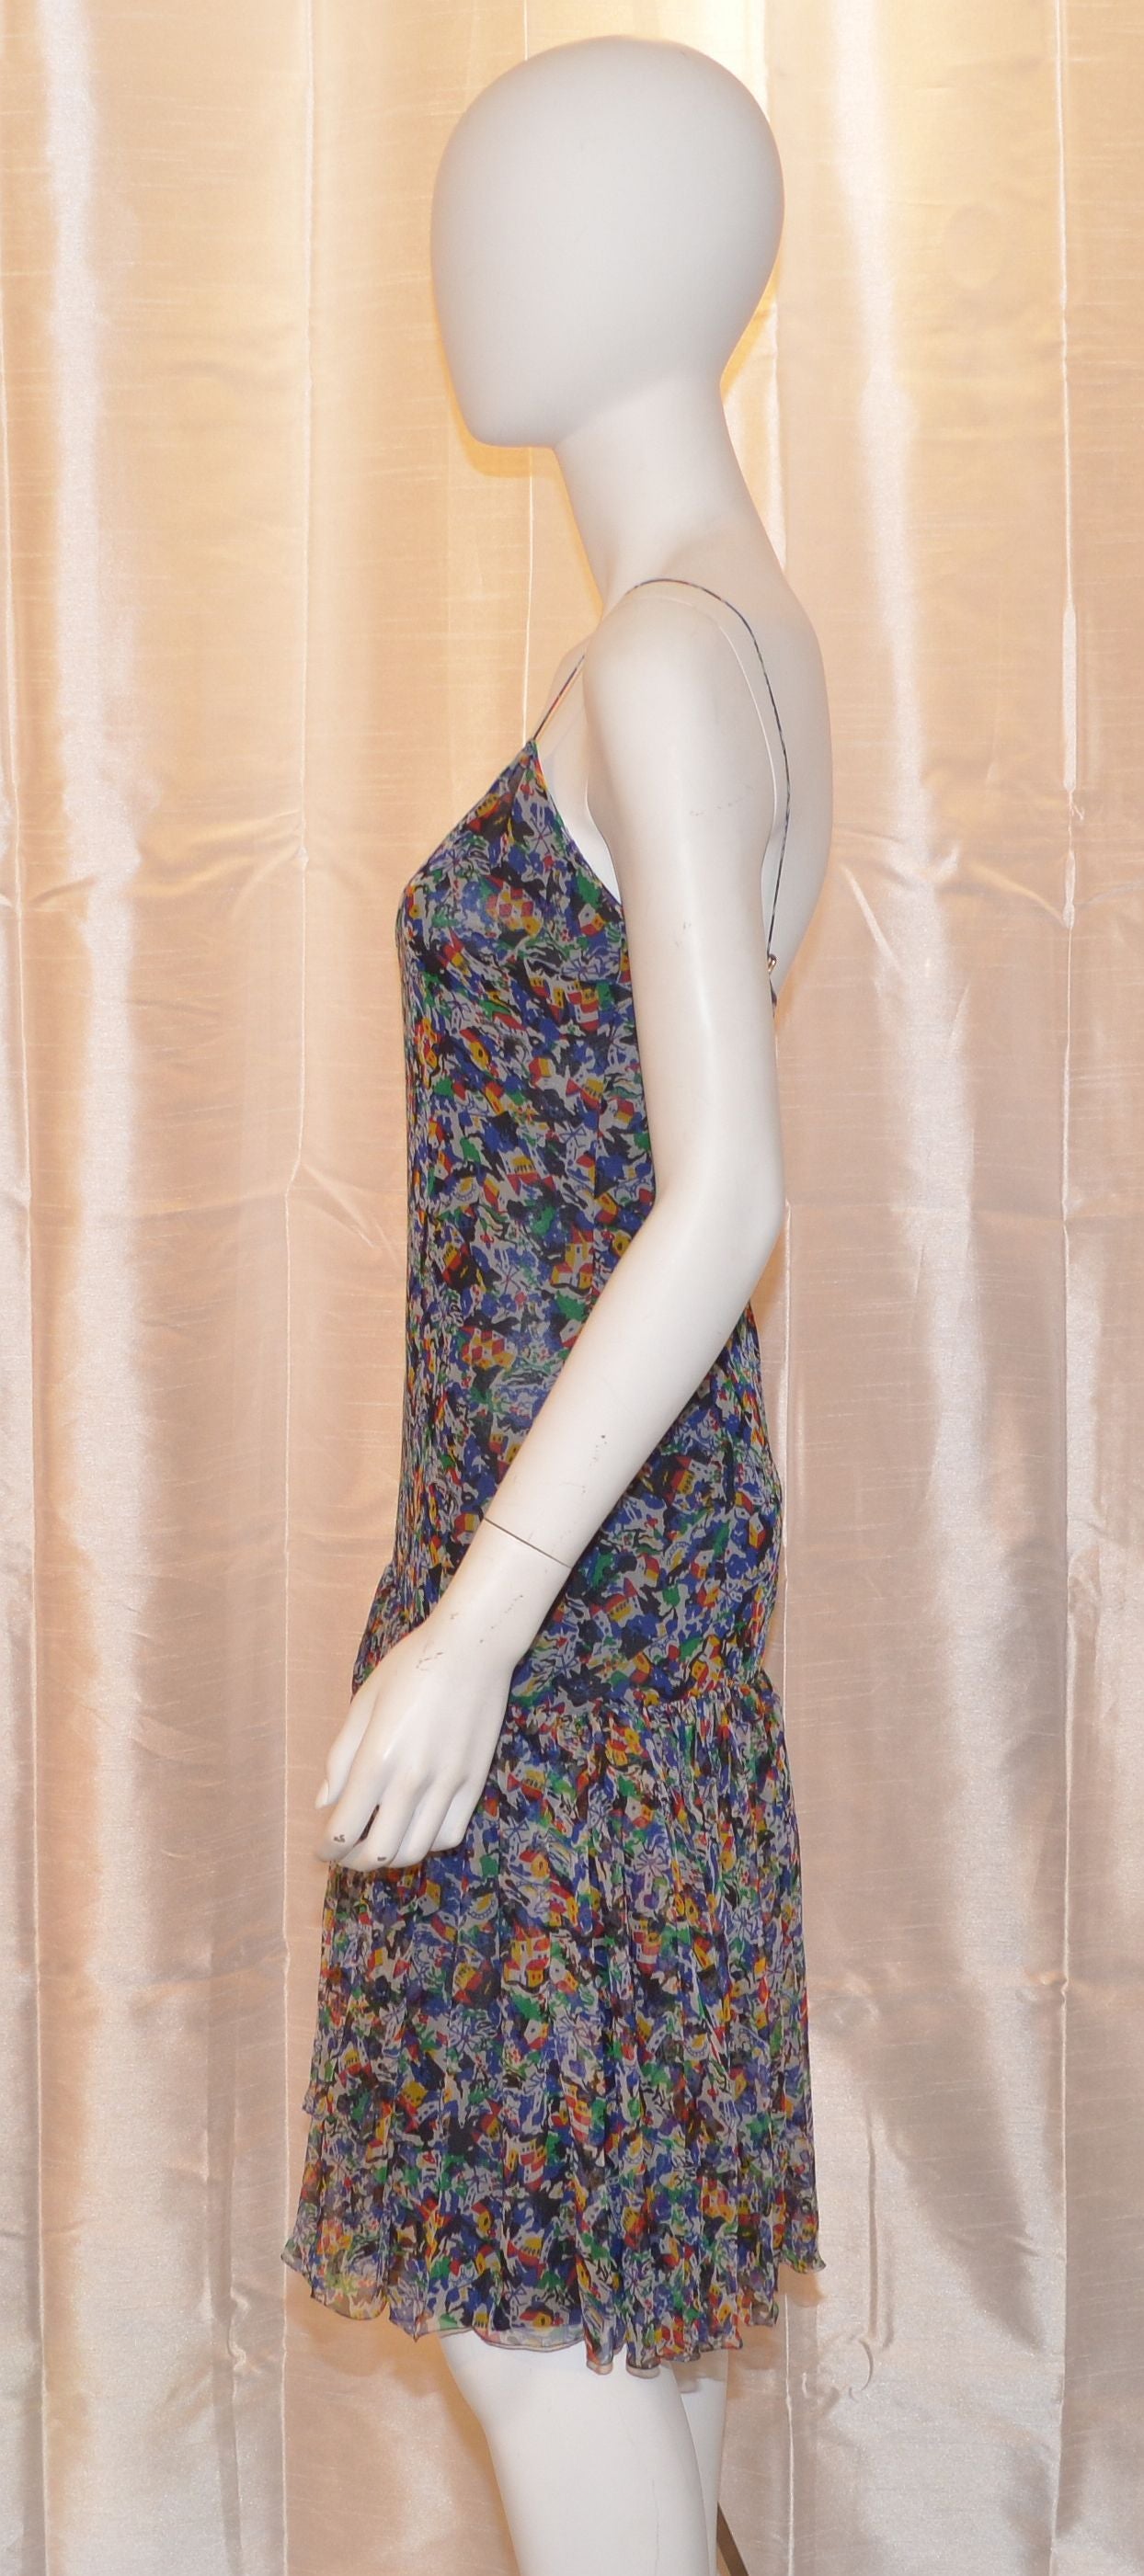 Chanel dress features a unique print throughout with a drop-waist. There is a back zipper and hook-and-eye closure, marked a size 38, and is made in France. 

Measurements:
Bust - 30''
Waist - 28''
Hips - 33''
Length - 40.5''